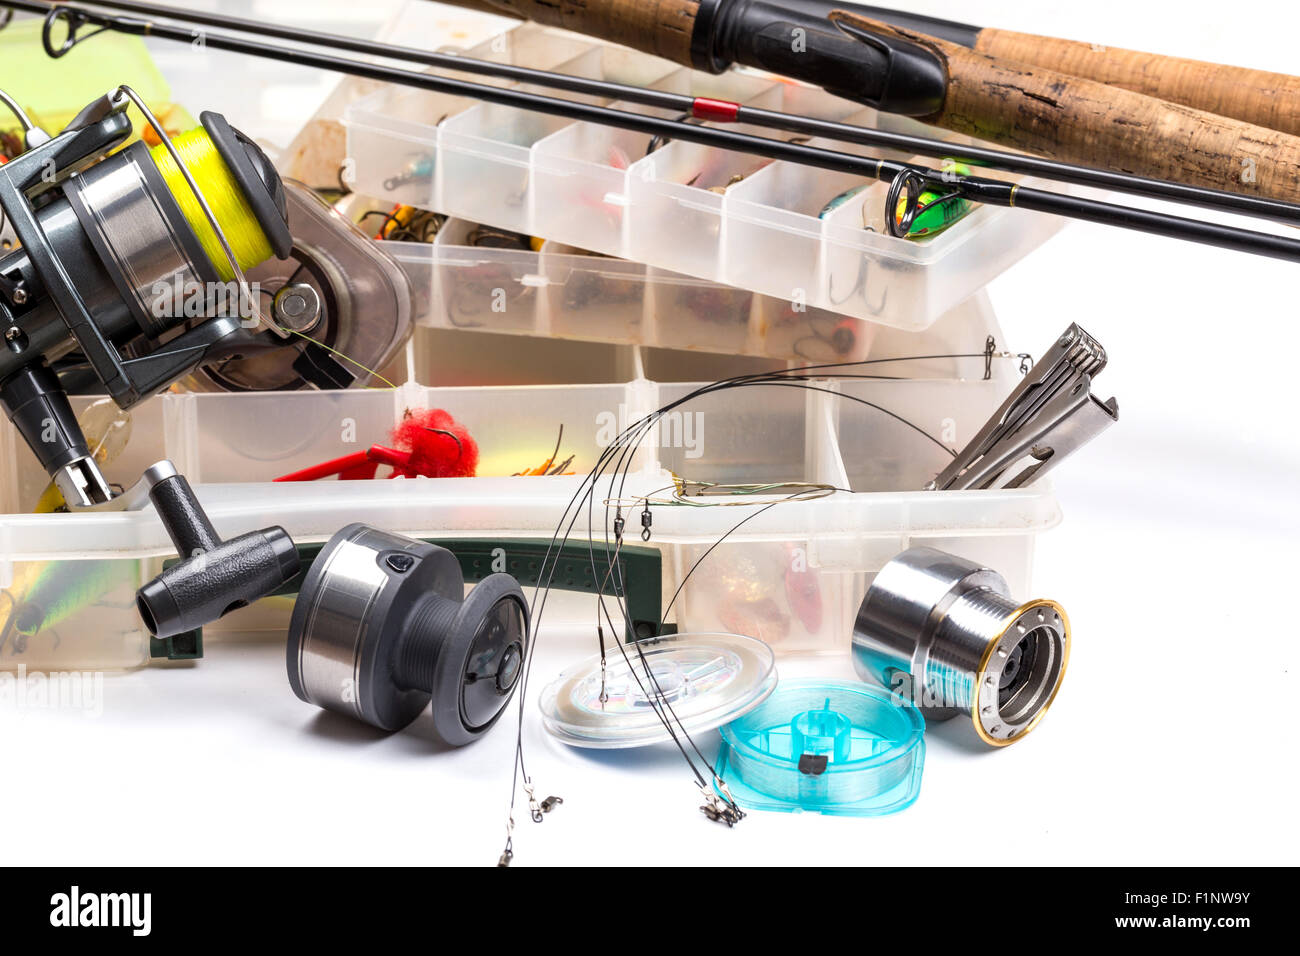 https://c8.alamy.com/comp/F1NW9Y/different-fishing-tackles-rod-reel-line-and-lures-in-box-on-white-F1NW9Y.jpg